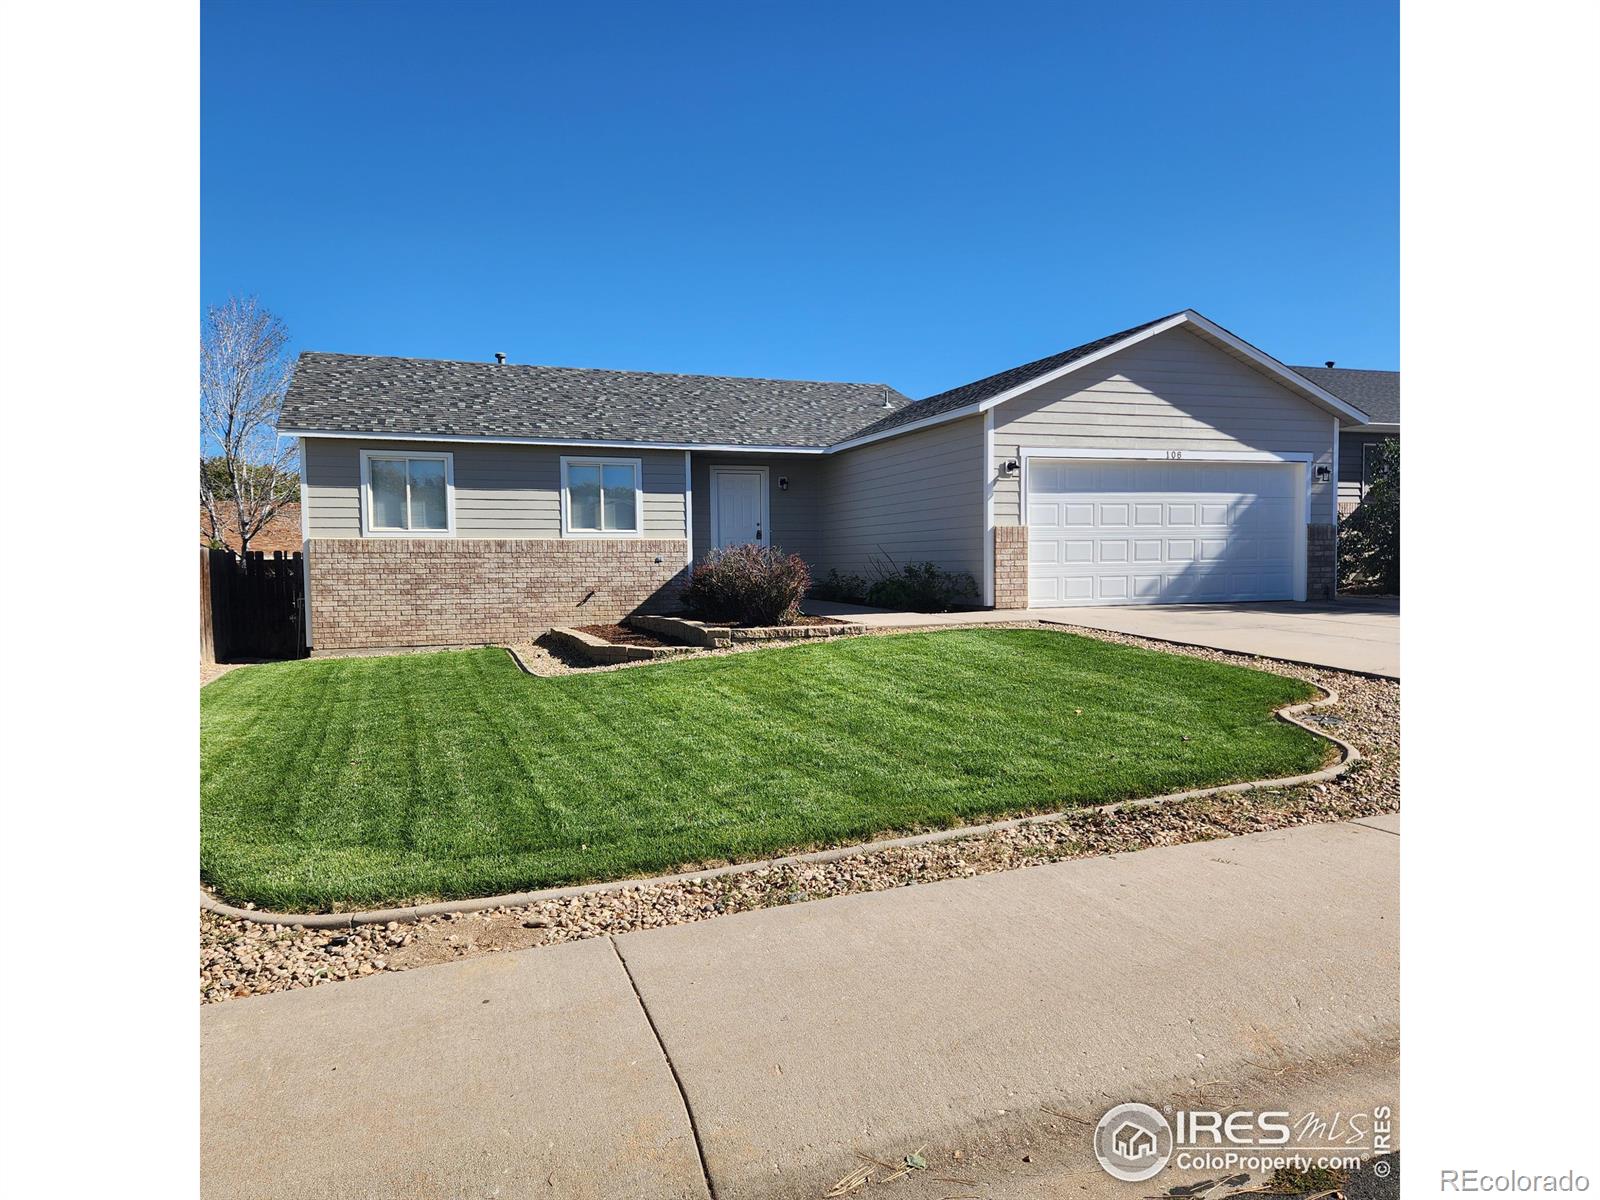 106 N 50th Ave Ct, greeley MLS: 456789998431 Beds: 3 Baths: 2 Price: $420,000